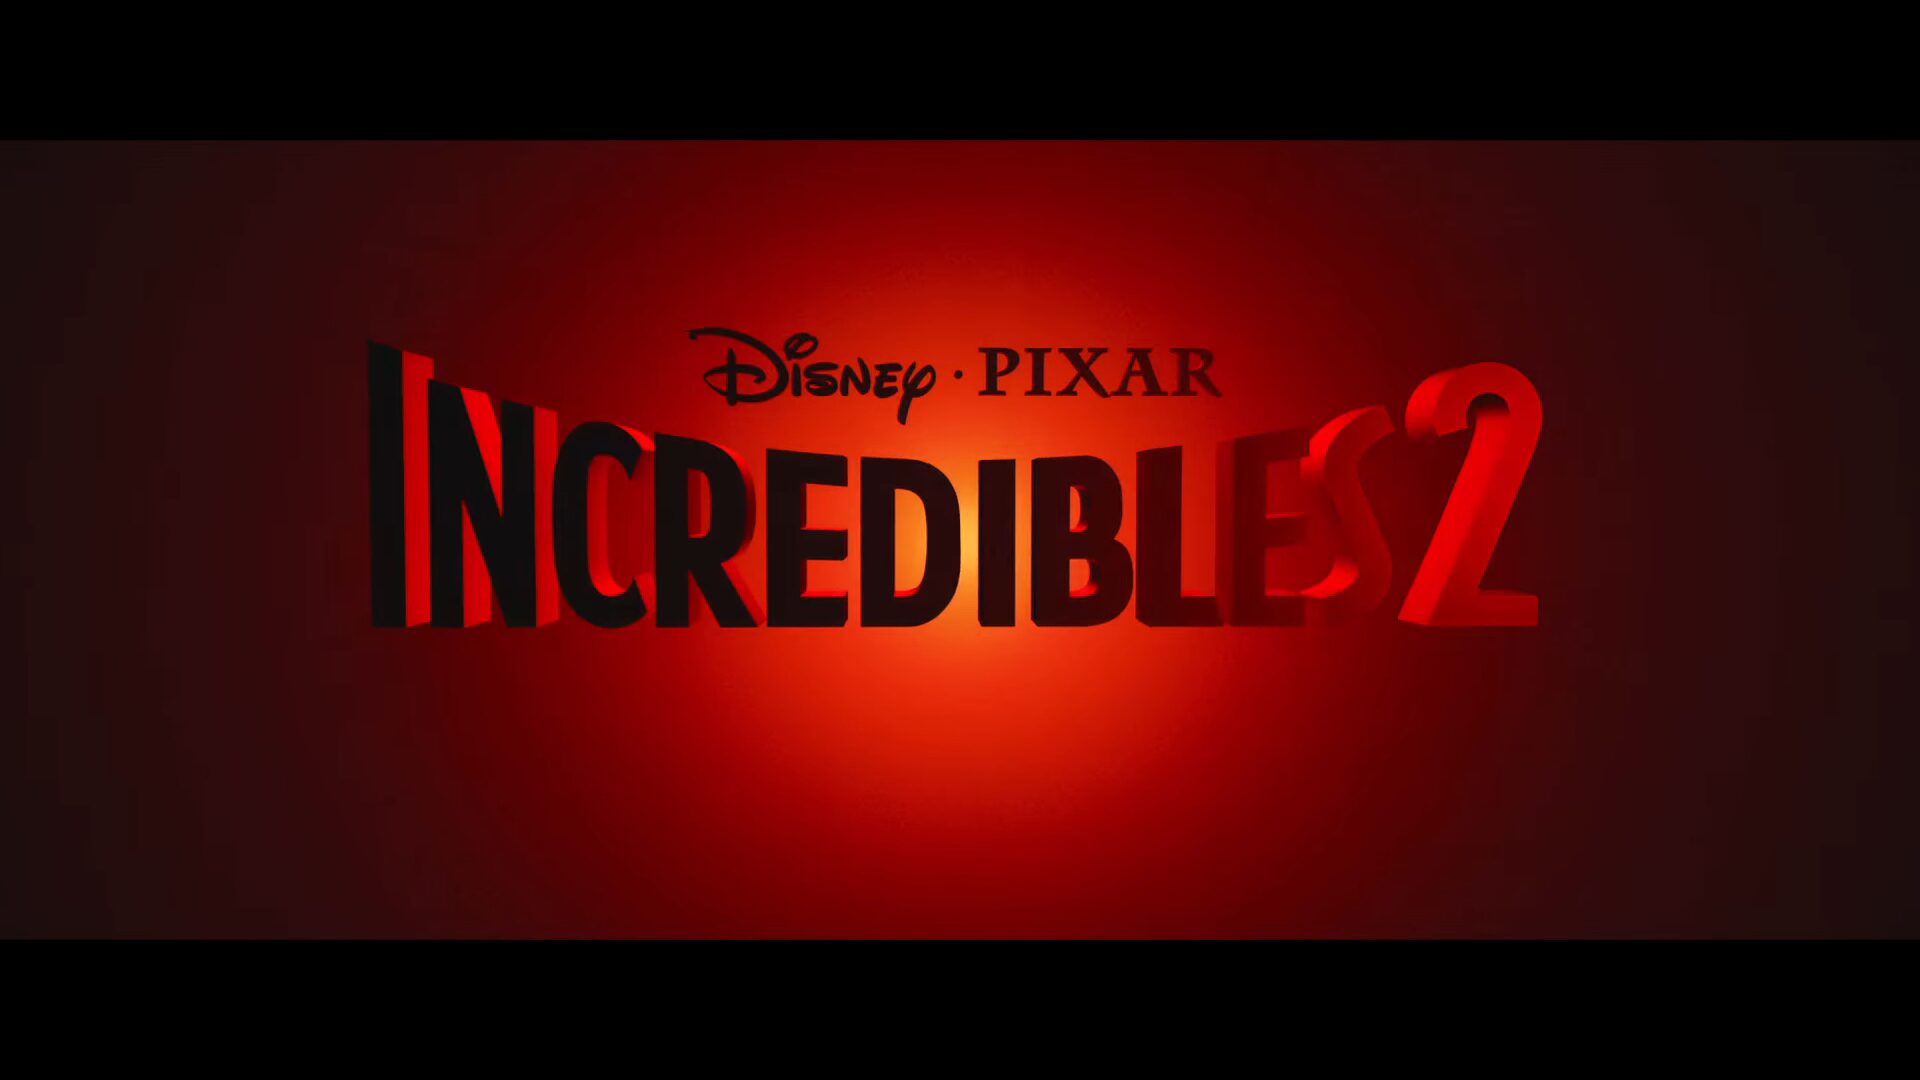 The Full Incredibles 2 Trailer is Out